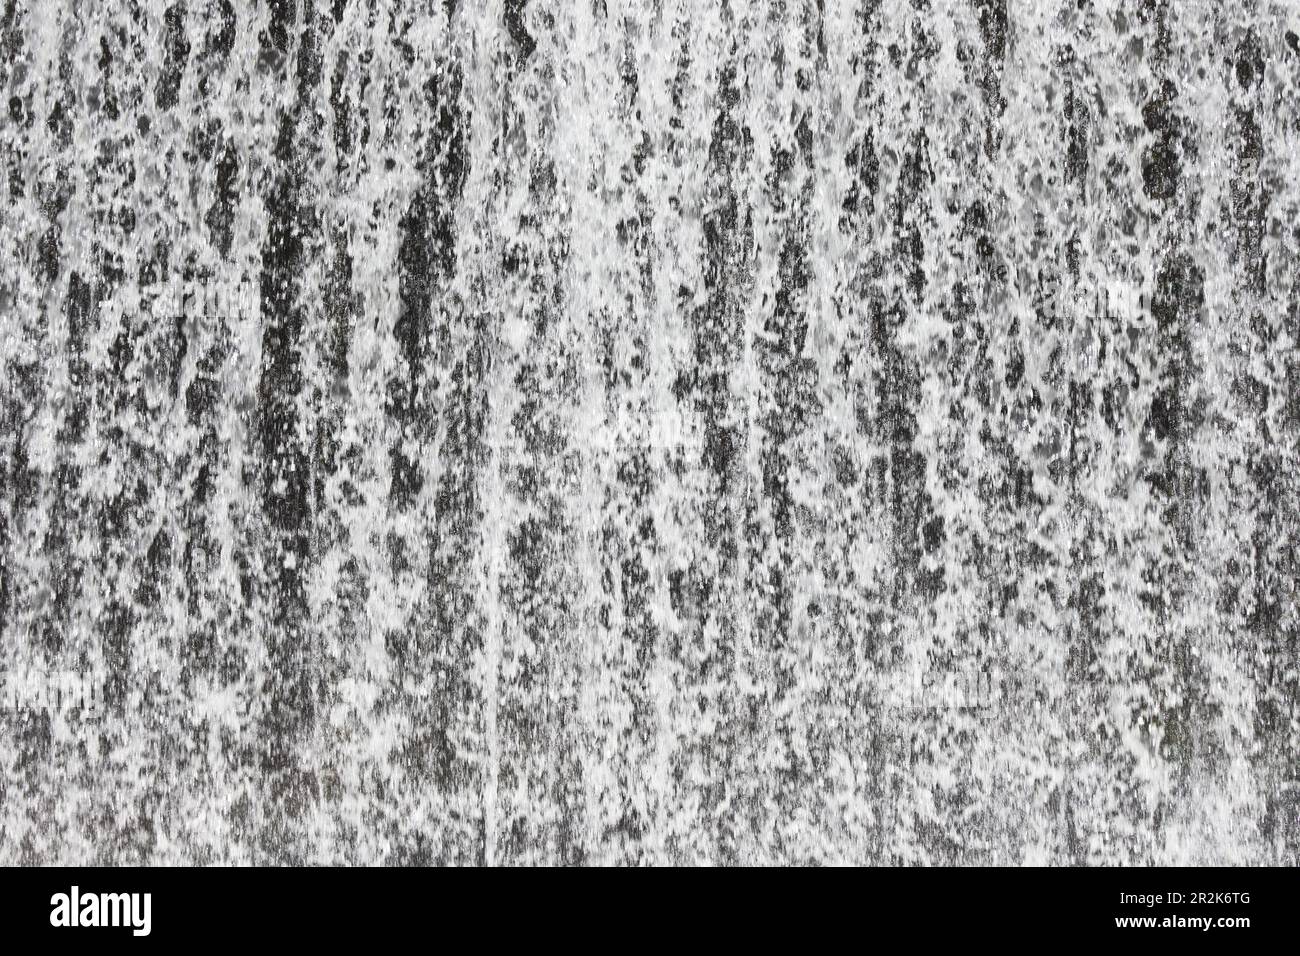 Full frame image close-up of a waterfall. Stock Photo